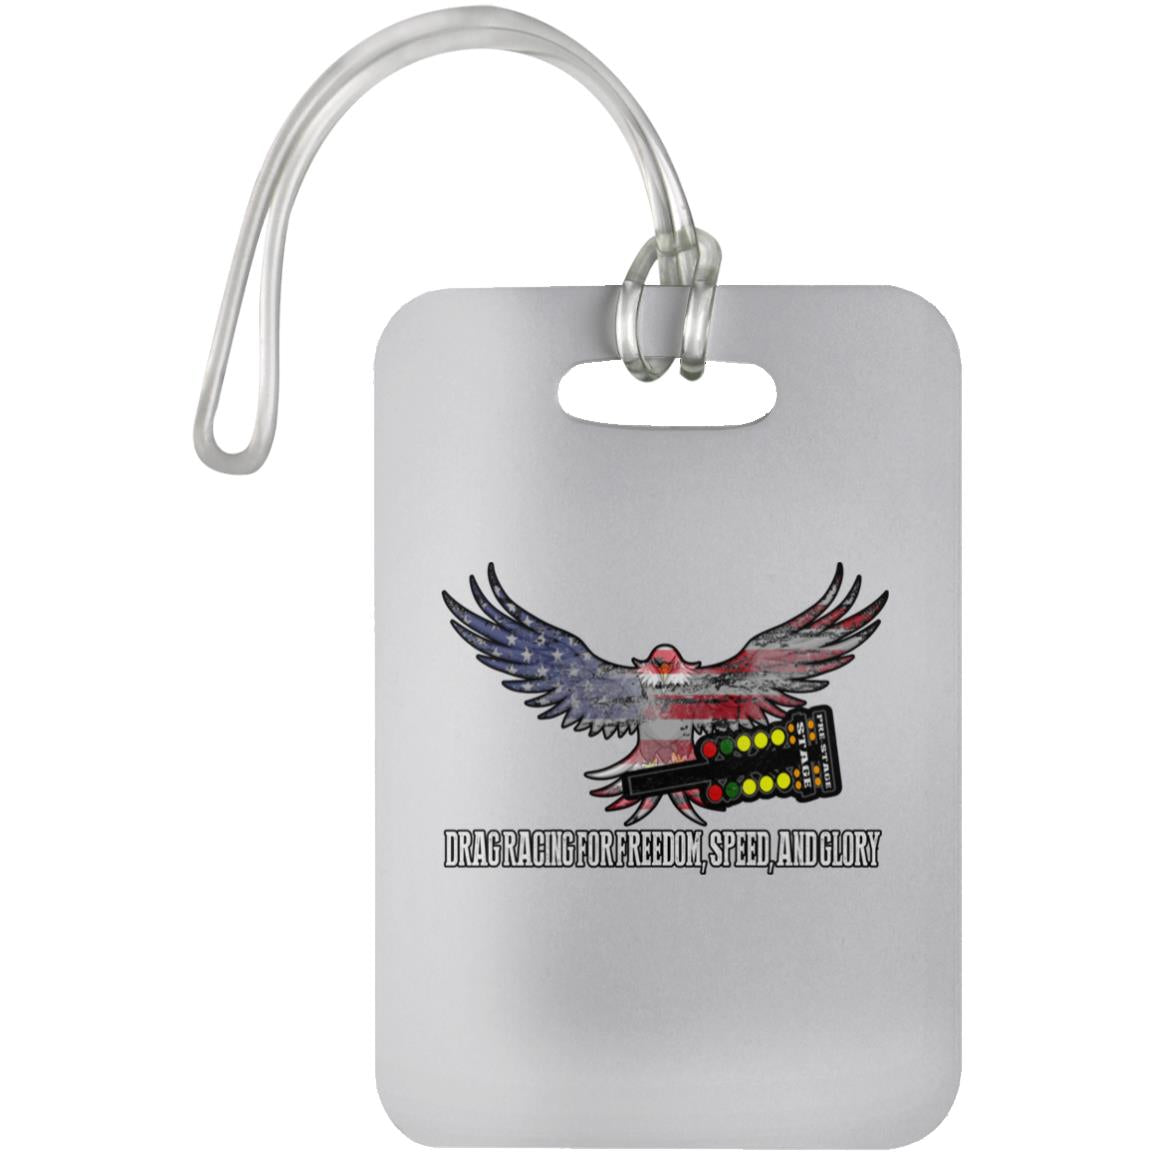 Drag Racing for Freedom, Speed, and Glory Luggage Bag Tag